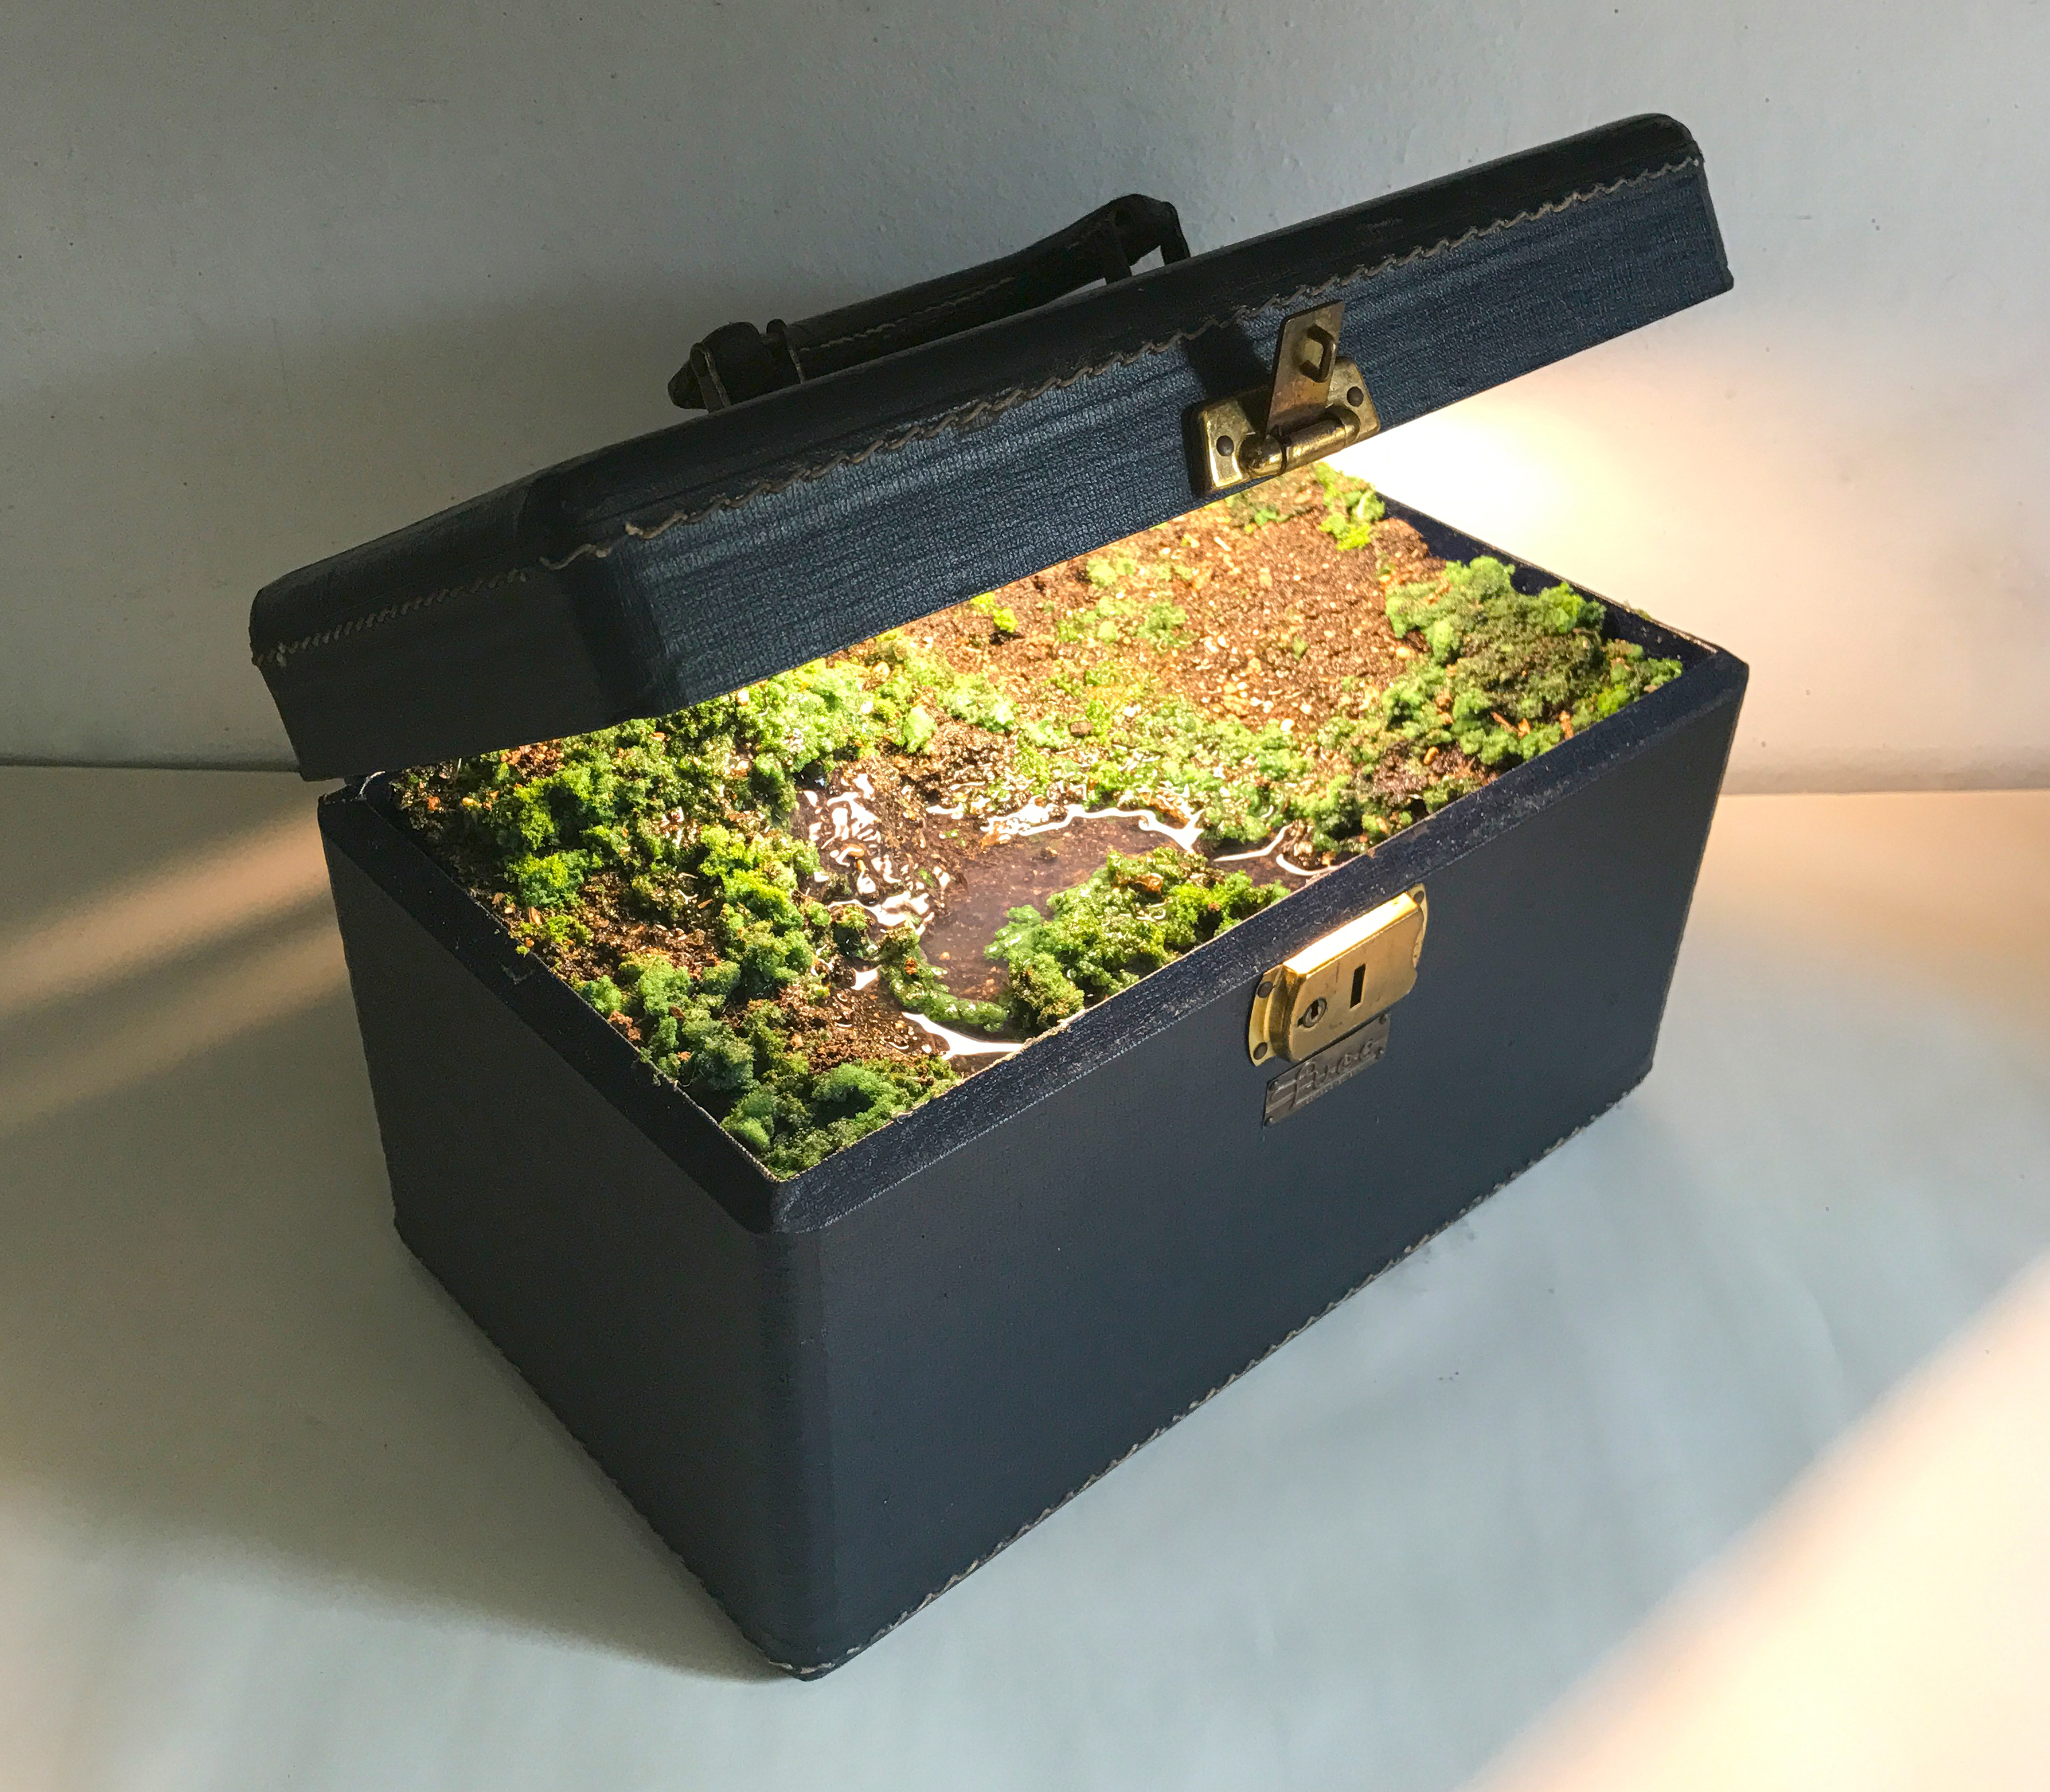 Traveling Landscape, Luce, 11 x 6.5 x 8 inches, vintage train case, resin, artificial foliage, soil, water, water pump, fluorescent light